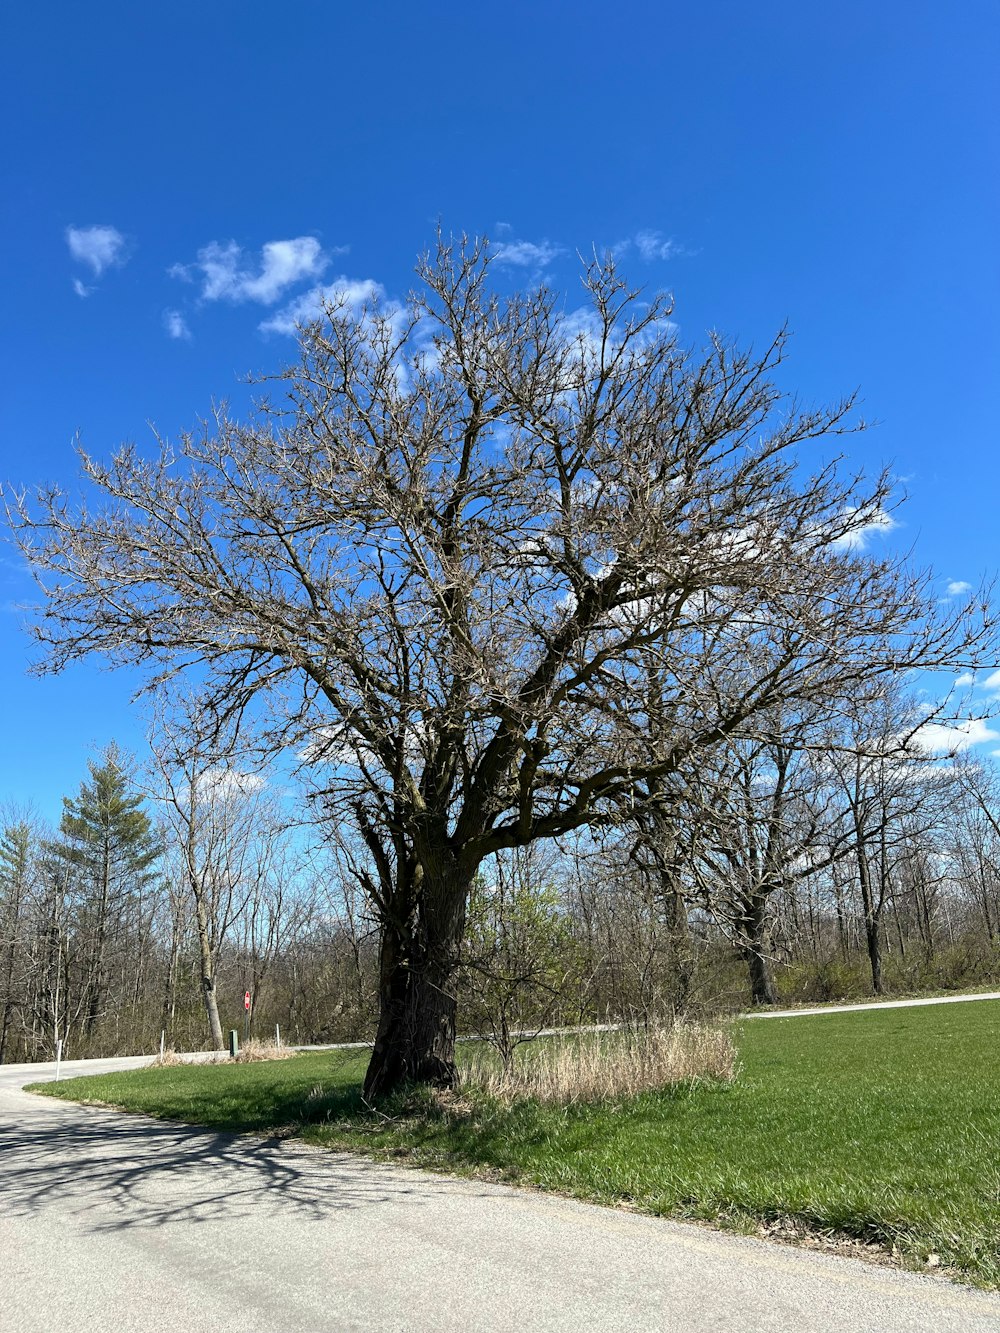 a large tree on the side of a road